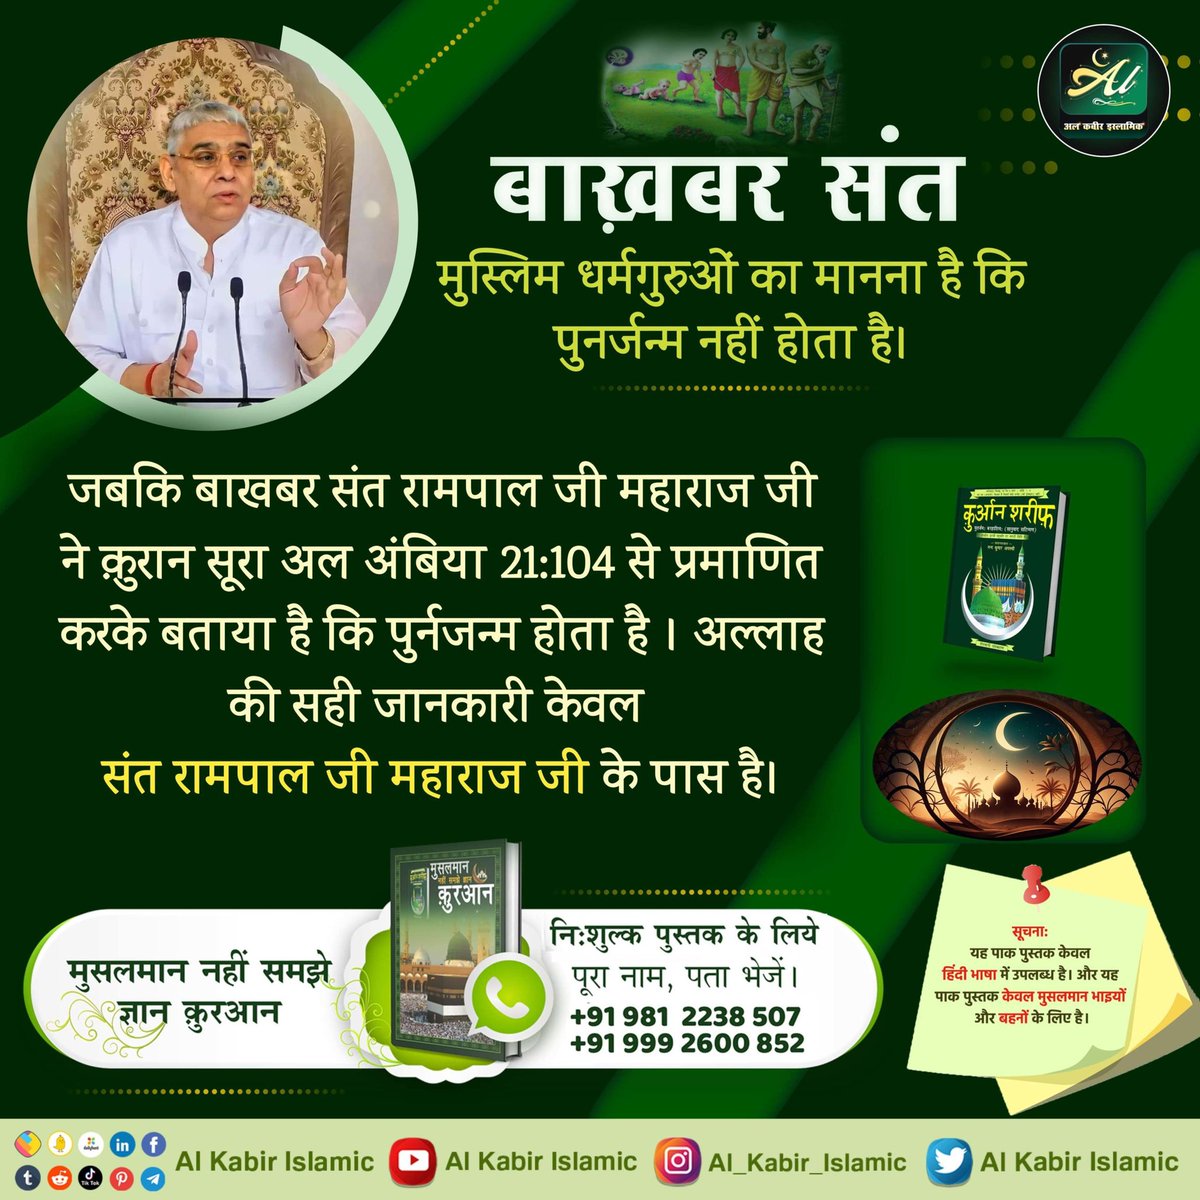 #कादर_अल्लाह_कबीर Muslim religious leaders believe that there is no rebirth. Whereas Baakhabar Sant Rampal Ji Maharaj has proved from Quran Sura📖 Al-Anbiya 21:104 that rebirth takes place, only Sant Rampal Ji has the correct information about Allah. #GodMorningSaturday